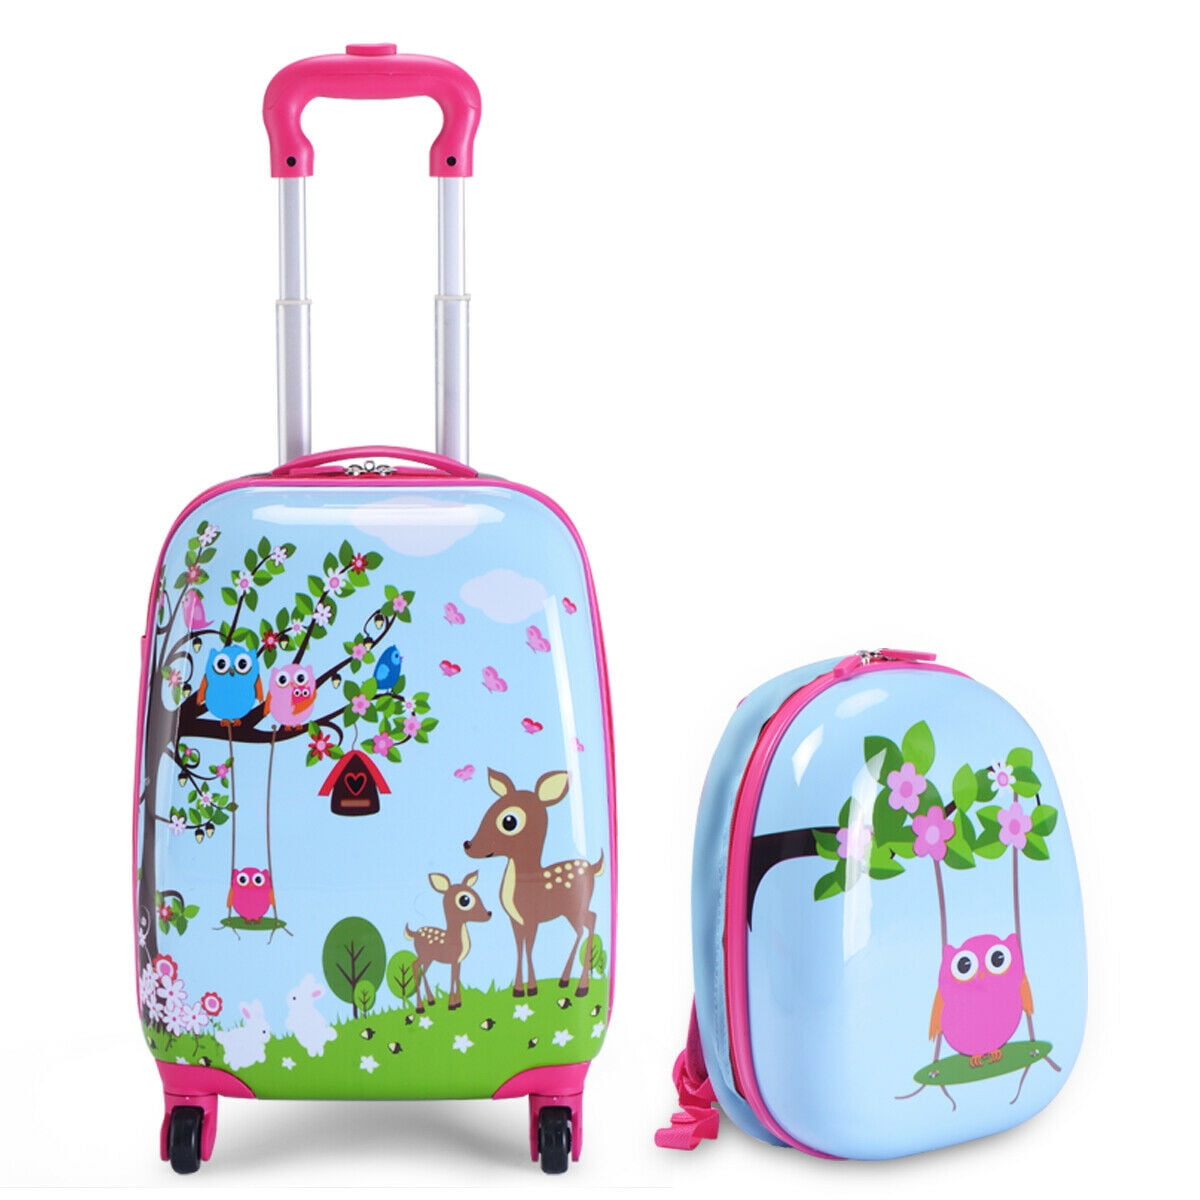 Penguin Blue Classic Rolling Luggage ANIMOR Kids Travel Partner Ride-On Suitcase and Carry-On Luggage 